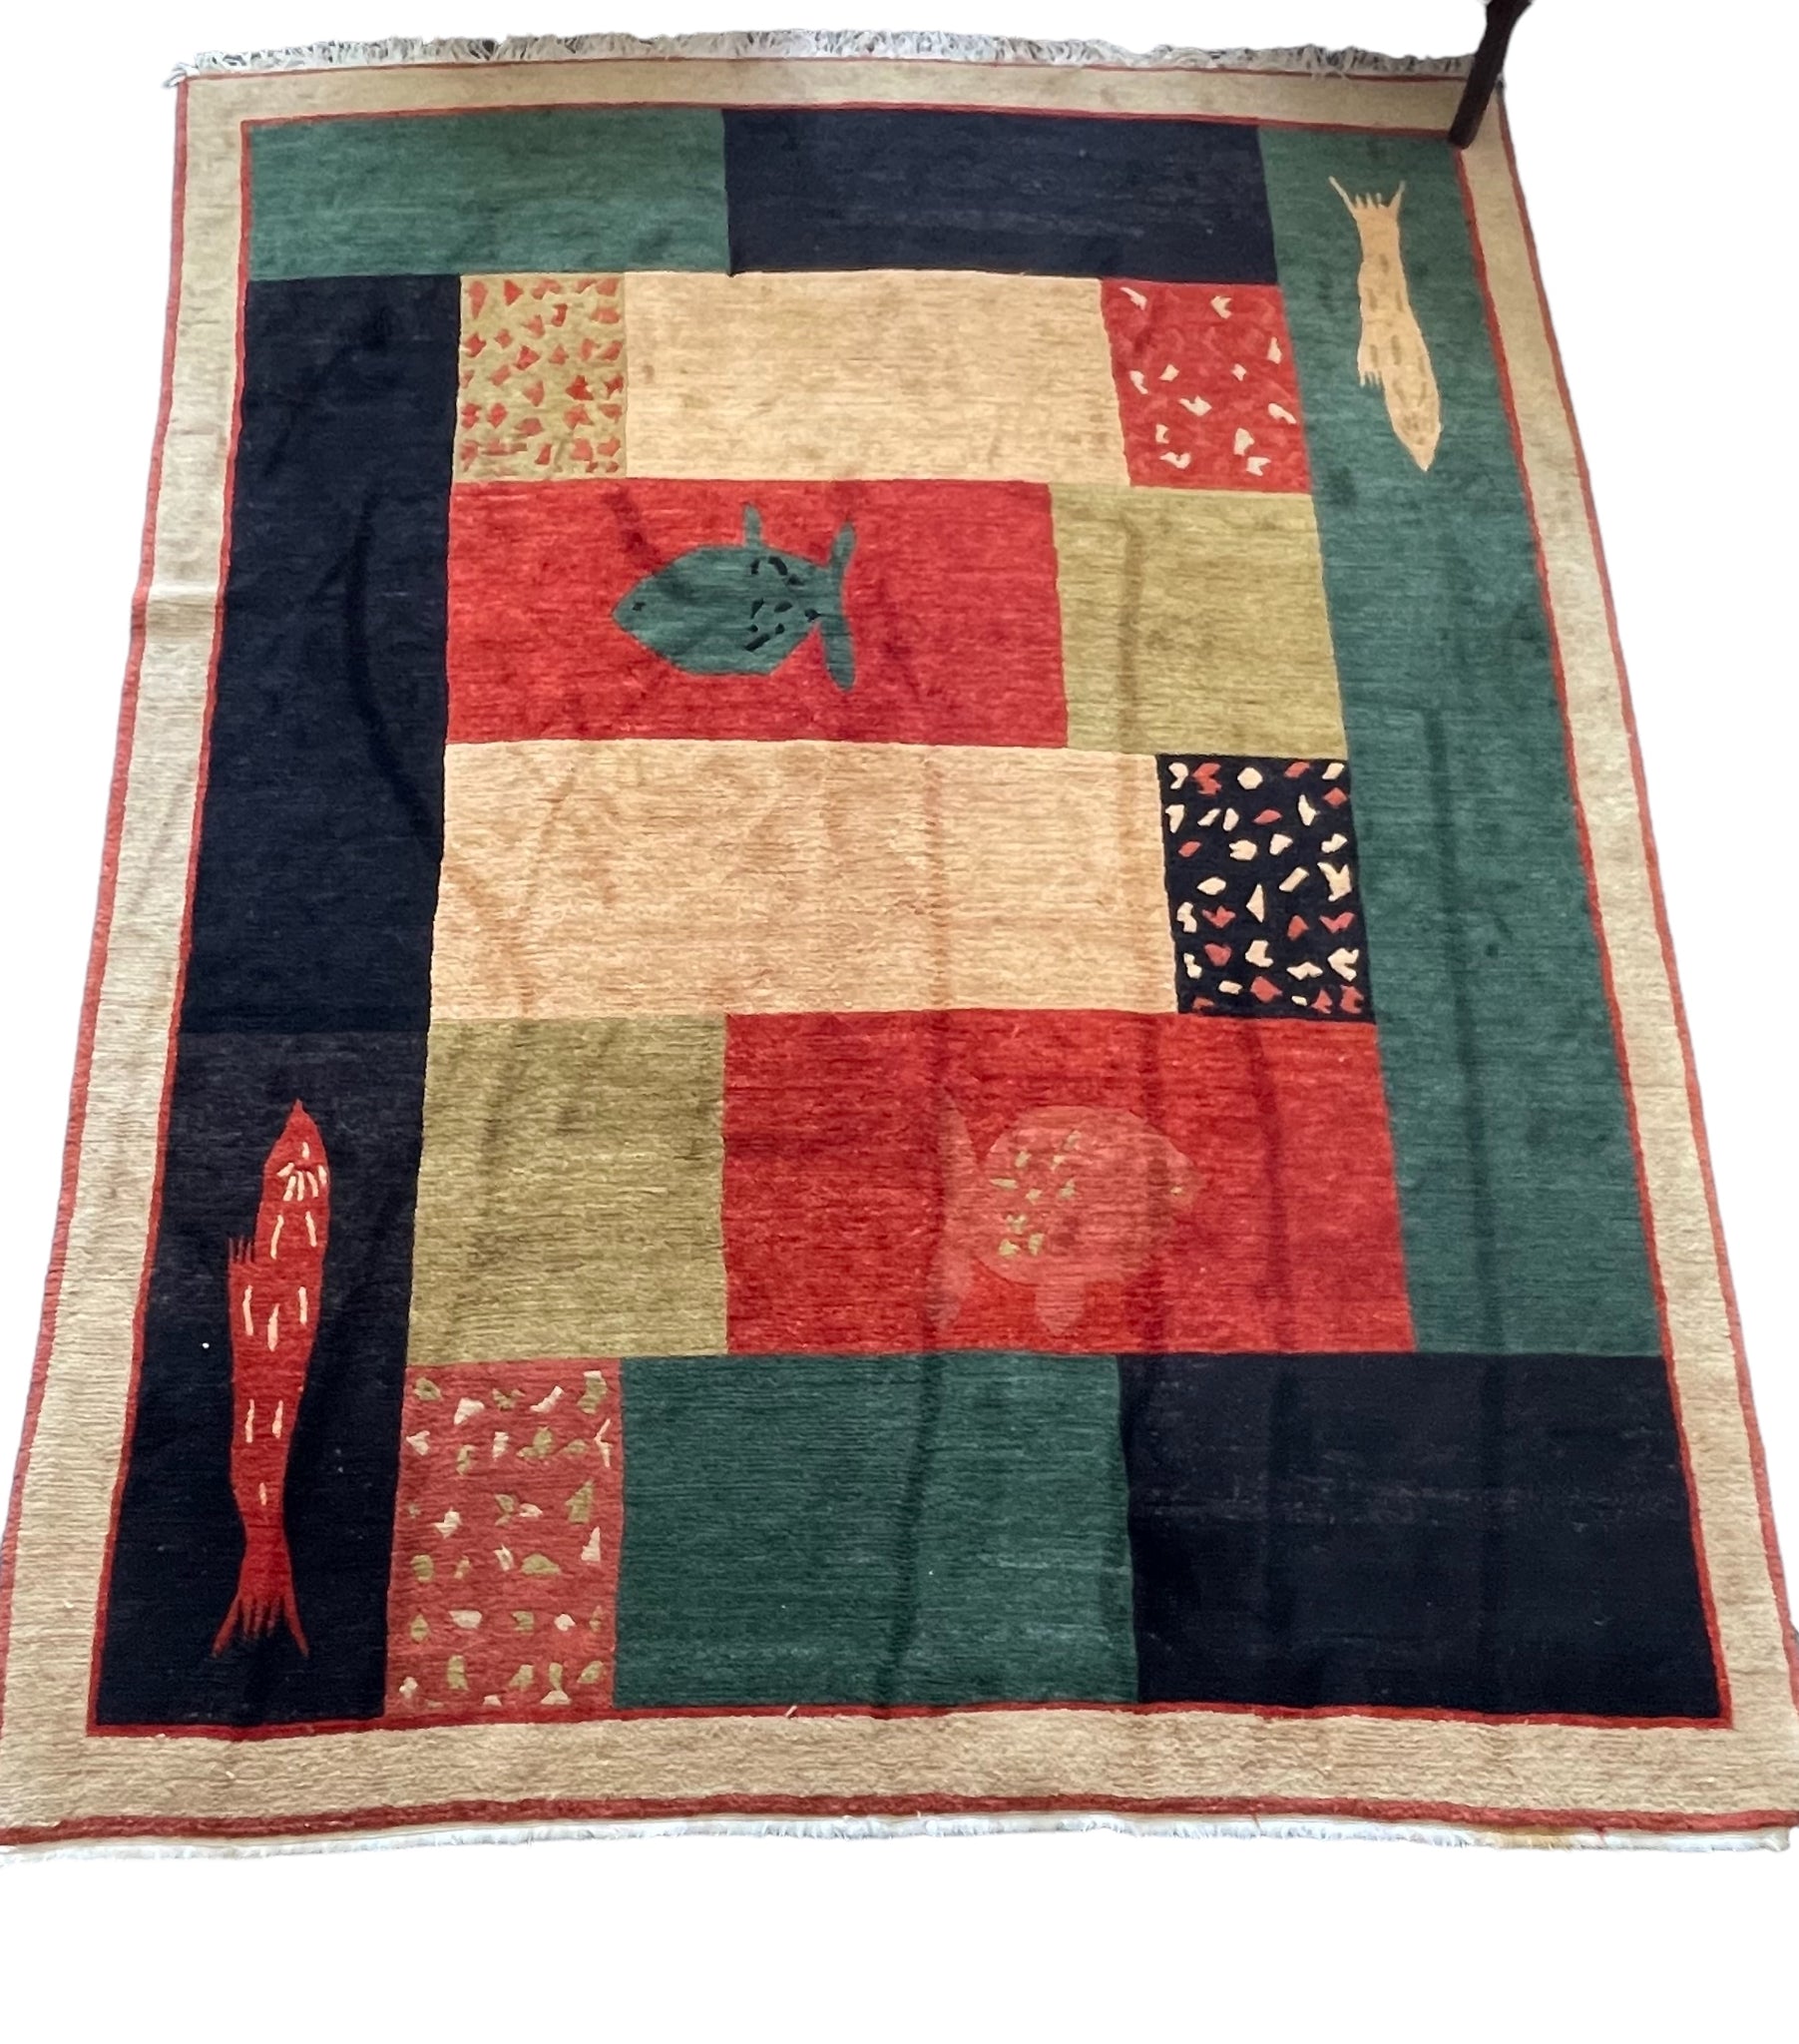 Uniquely Patterned Hand Loomed Wool Rug with Multiple Blocks of Color and Fish